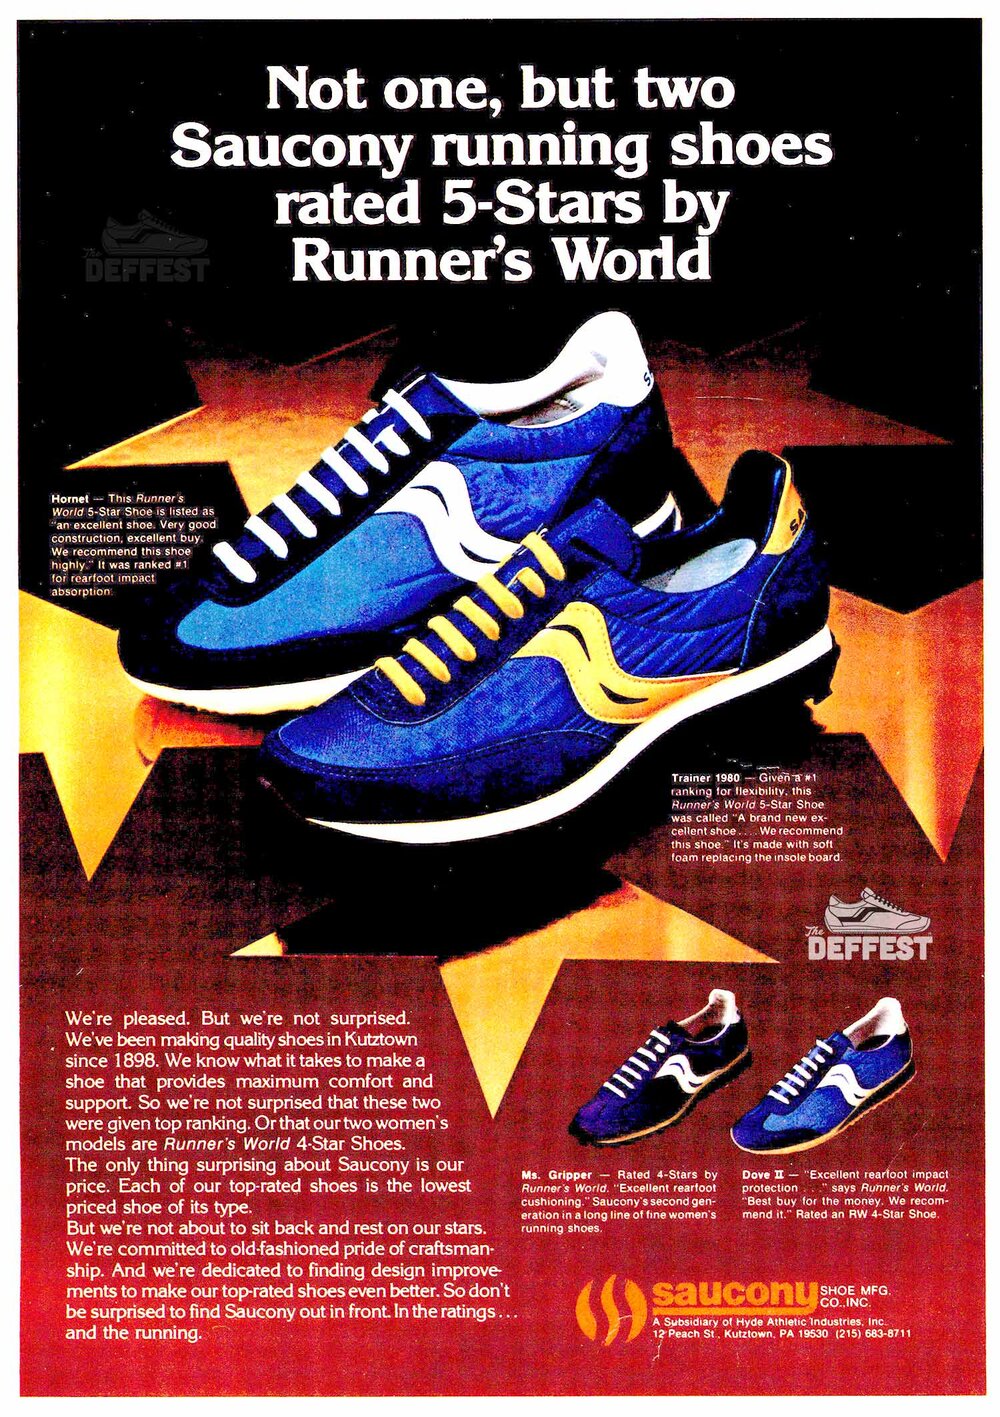 vintage running shoes ​ — The Deffest®. A vintage and retro 